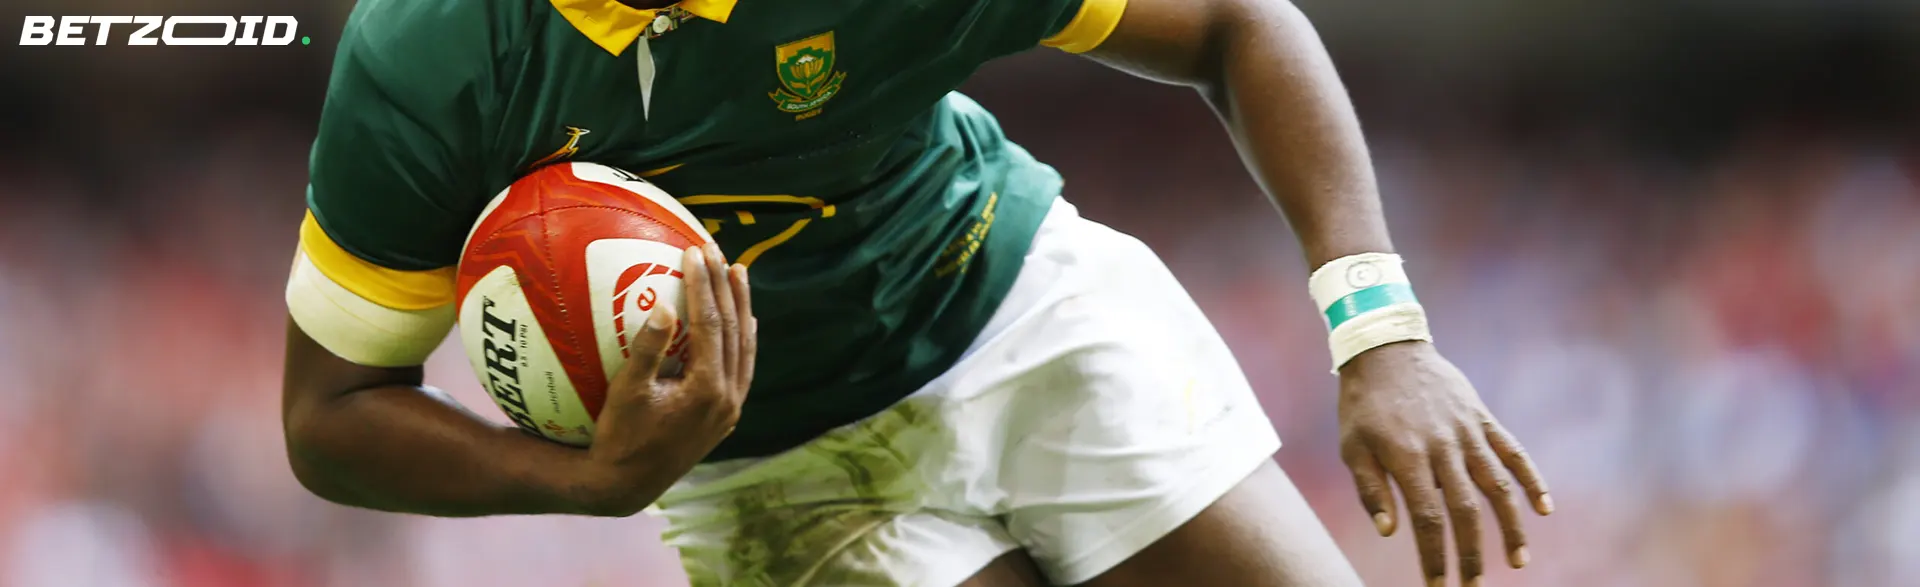 Close-up of a rugby player holding the ball, representing SK betting sites.